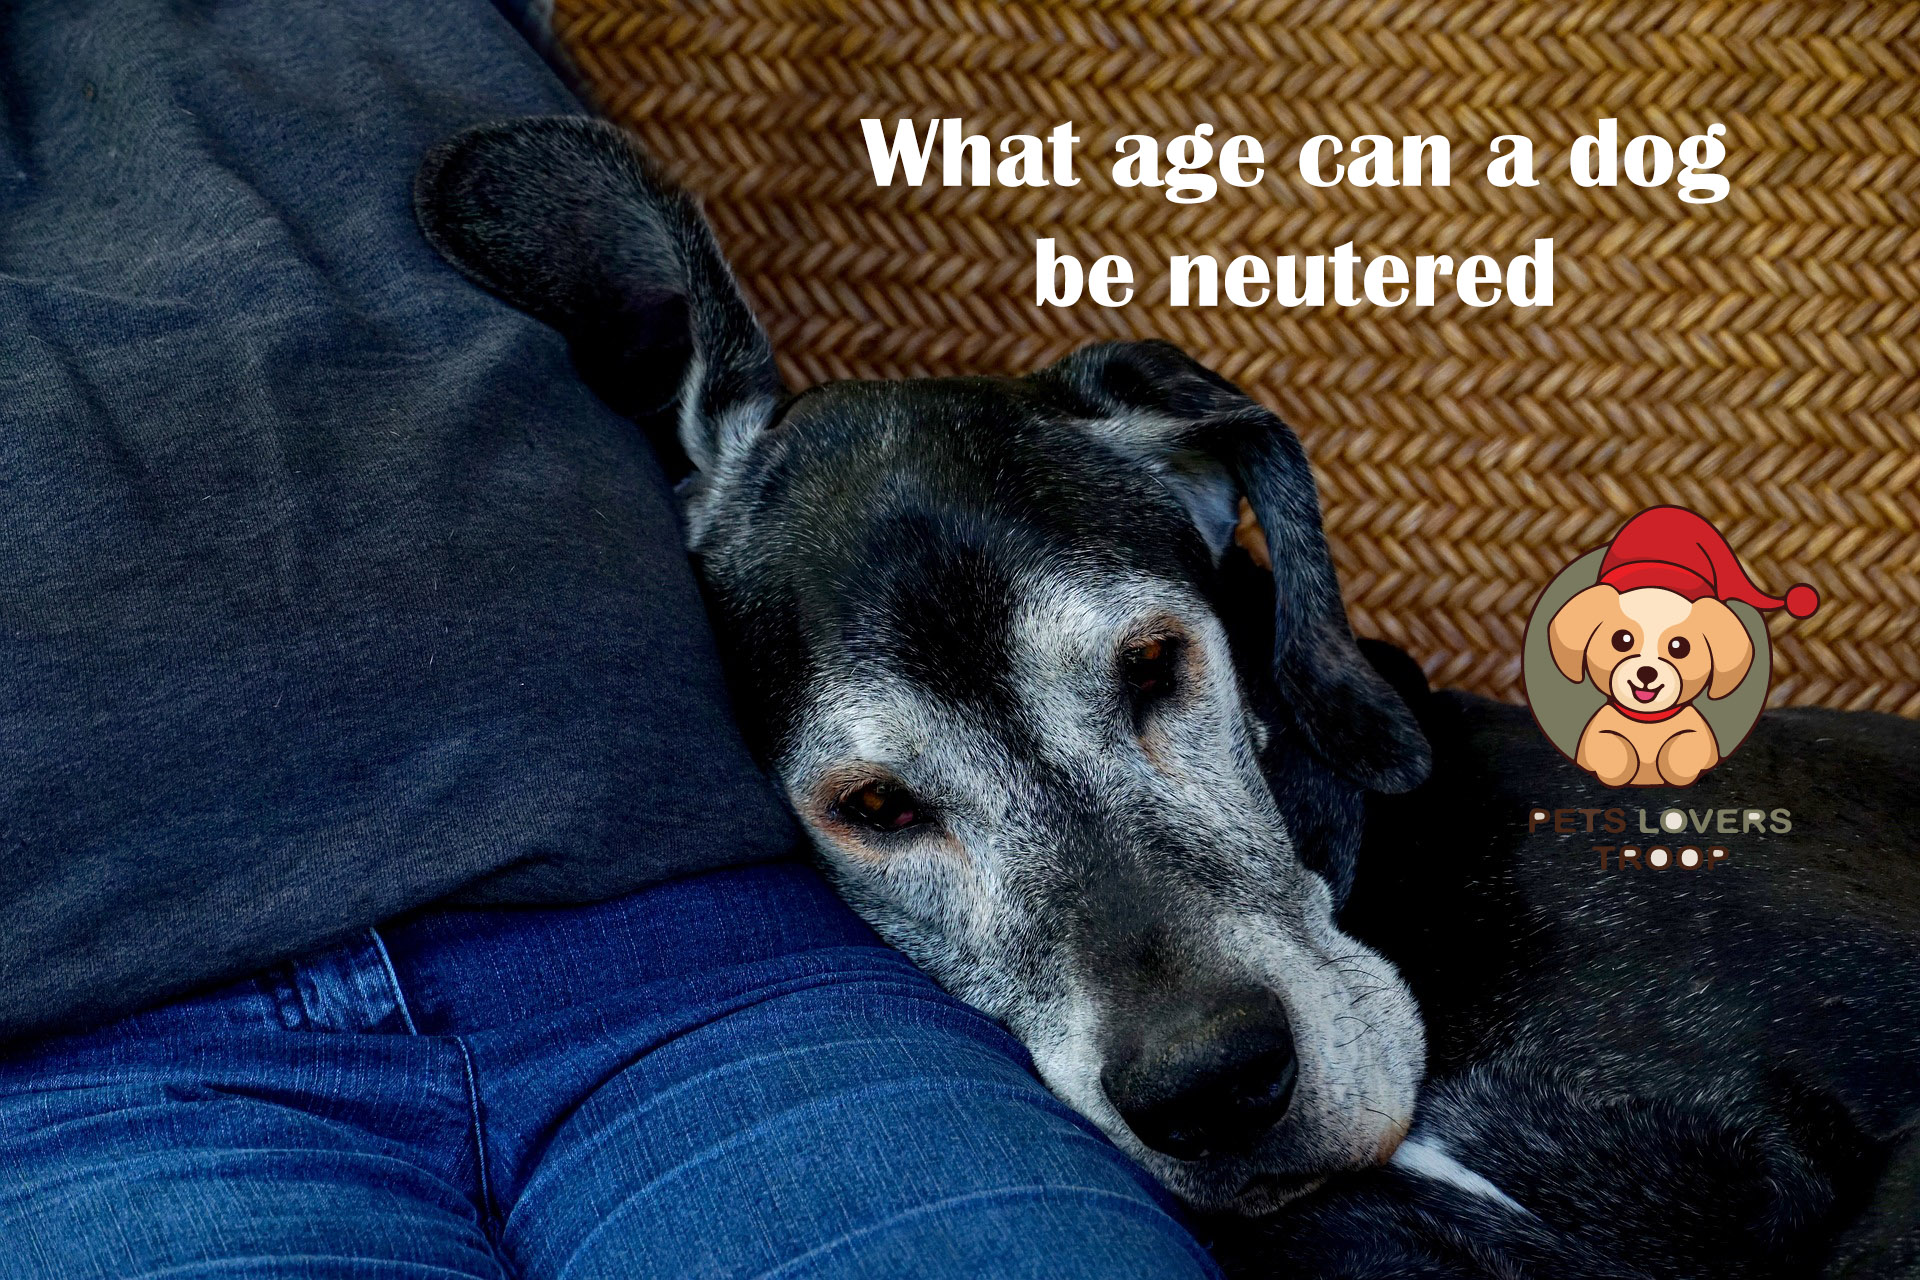 What age can a dog be neutered